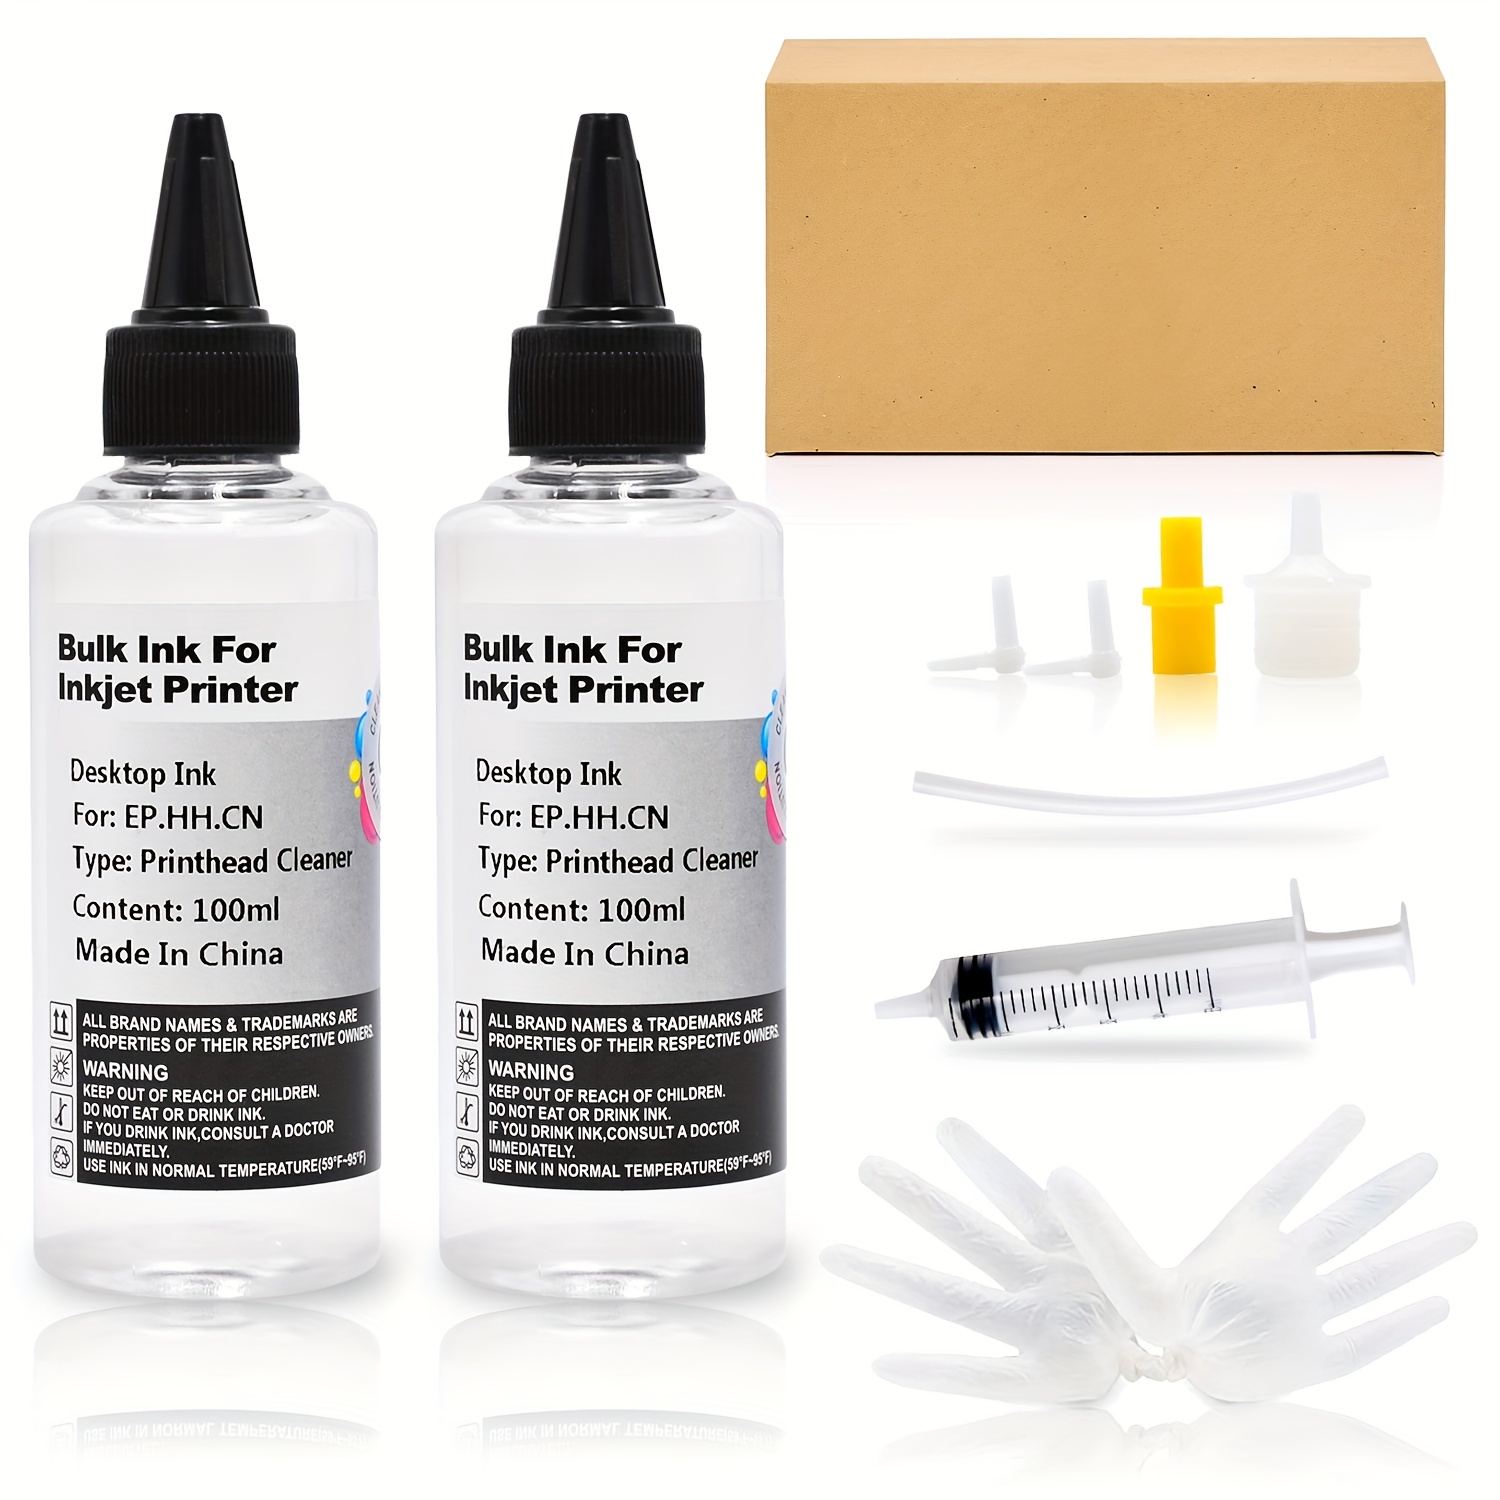 Ink Remover Refill